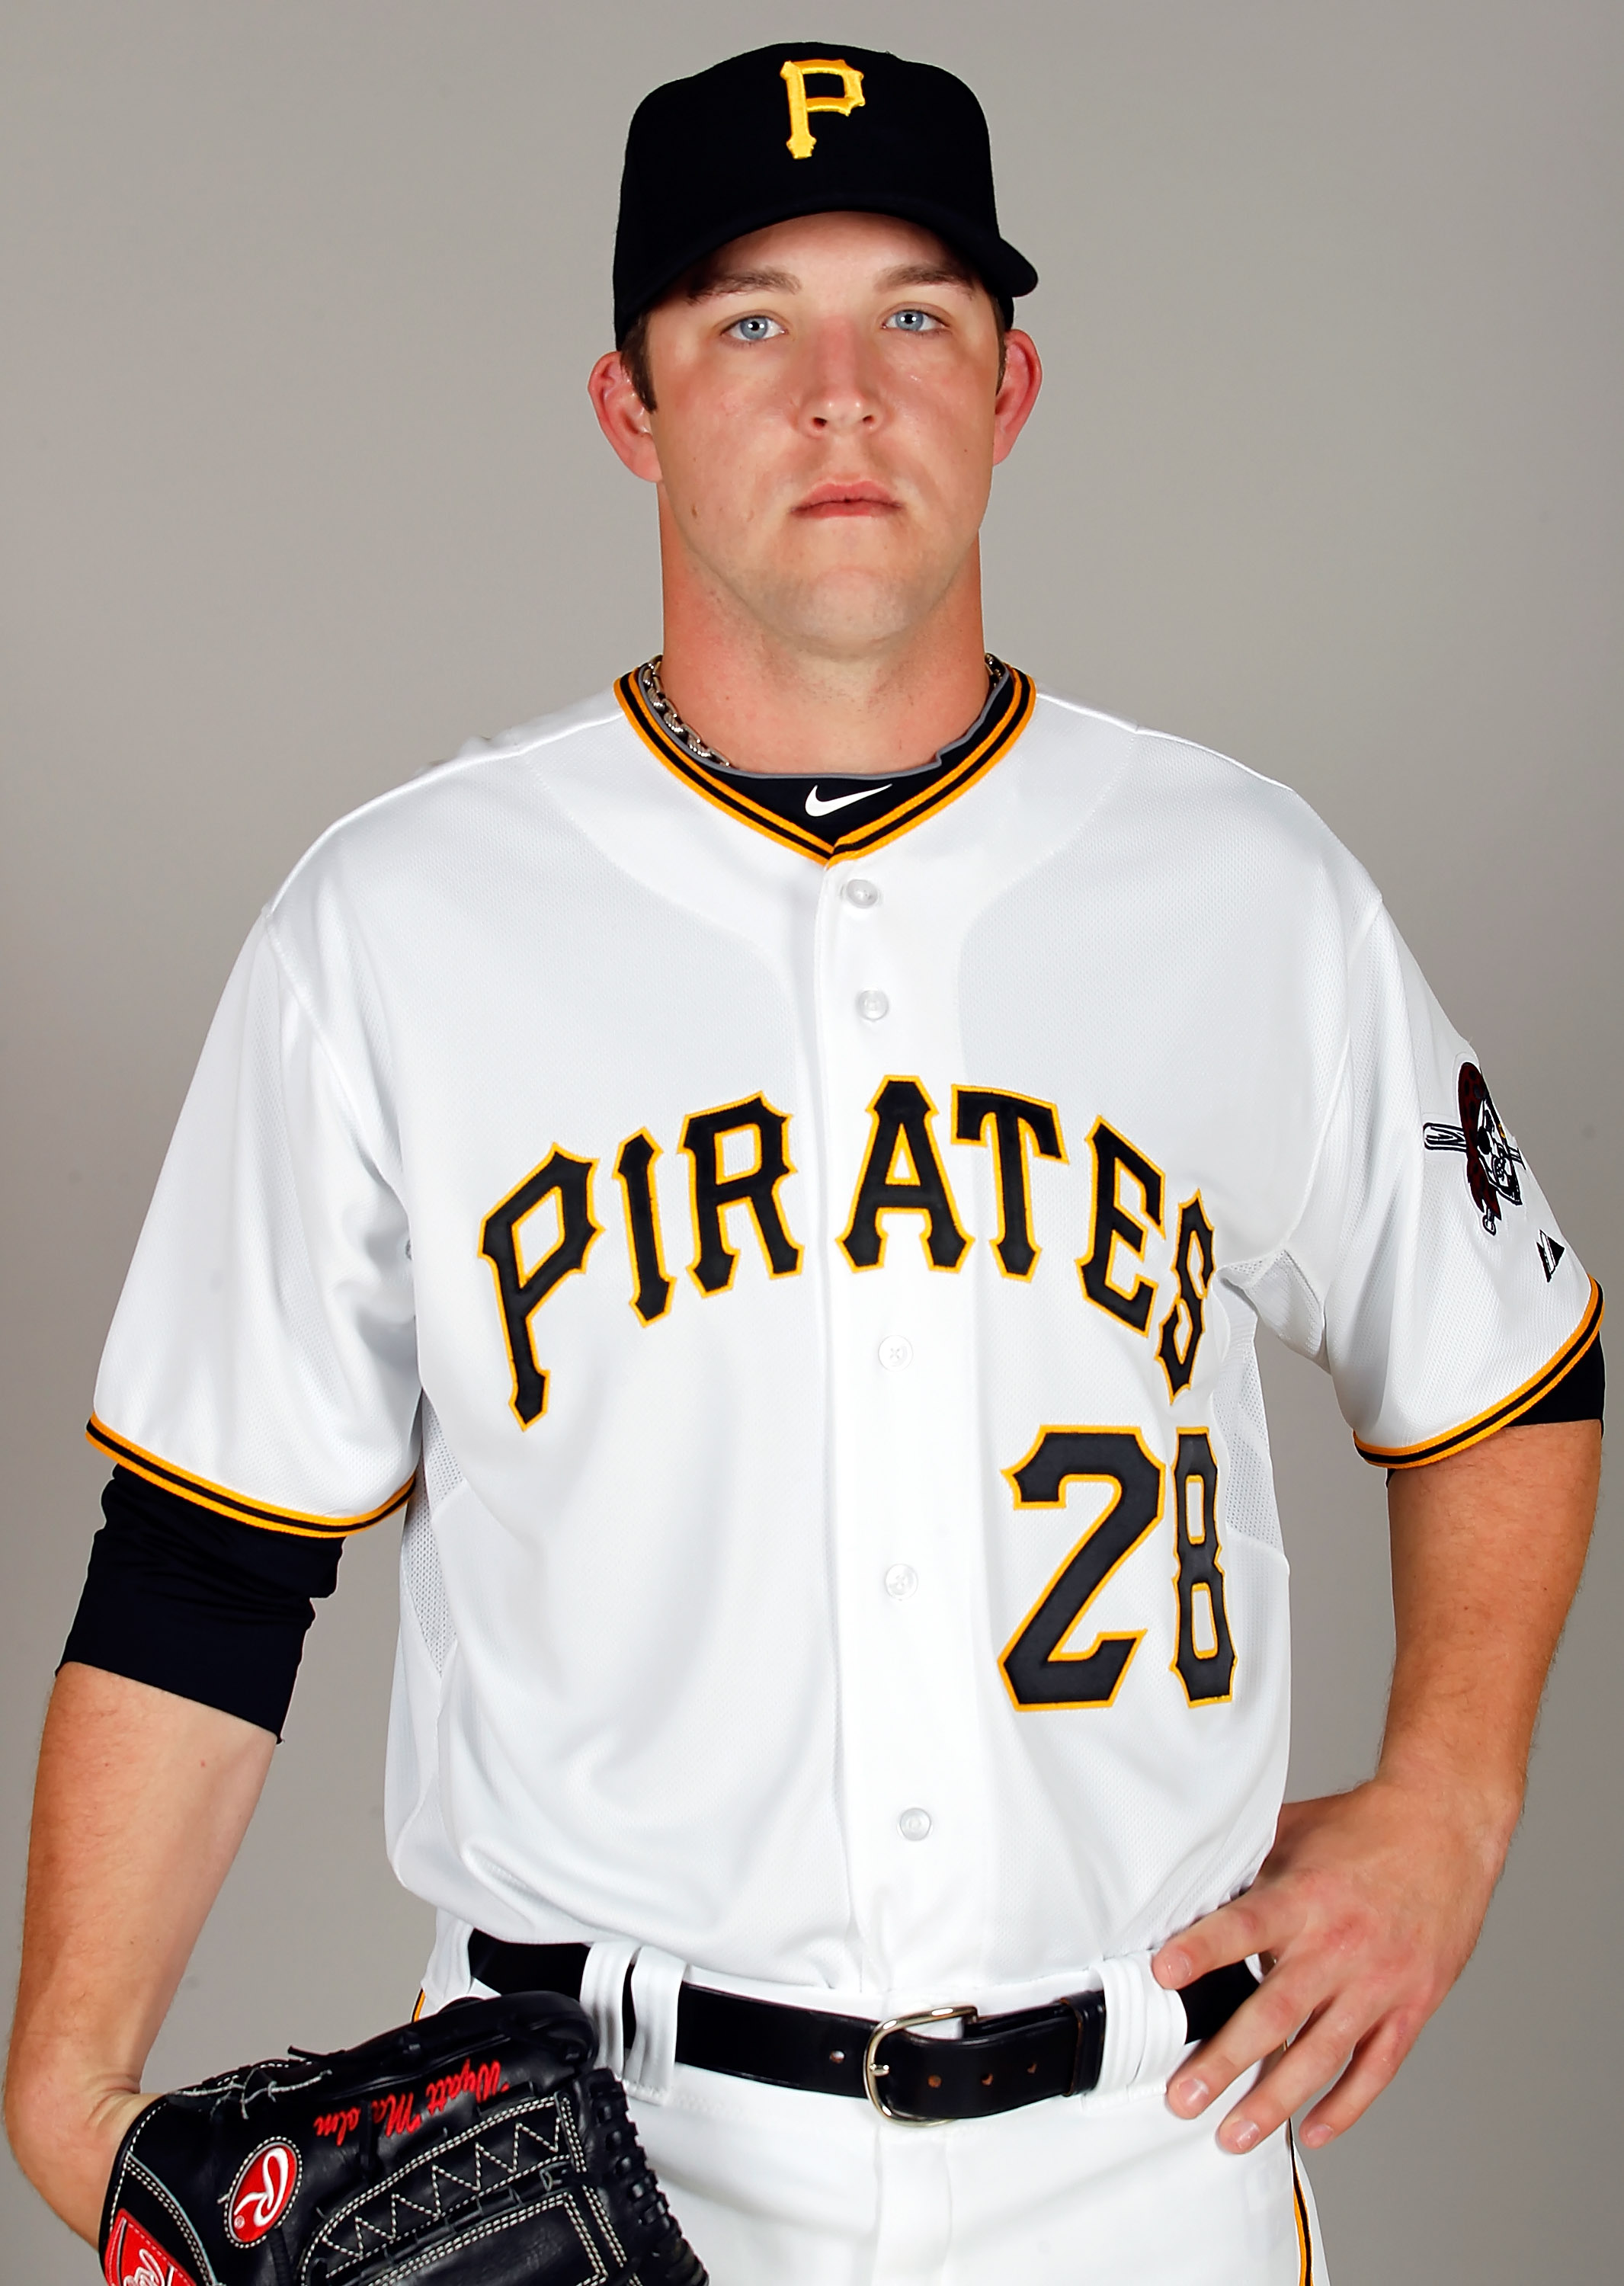 BRADENTON, FL - FEBRUARY 20:  Pitcher Paul Maholm #28 of the Pittsburgh Pirates poses for a photo during photo day at Pirate City on February 20, 2011 in Bradenton, Florida.  (Photo by J. Meric/Getty Images)